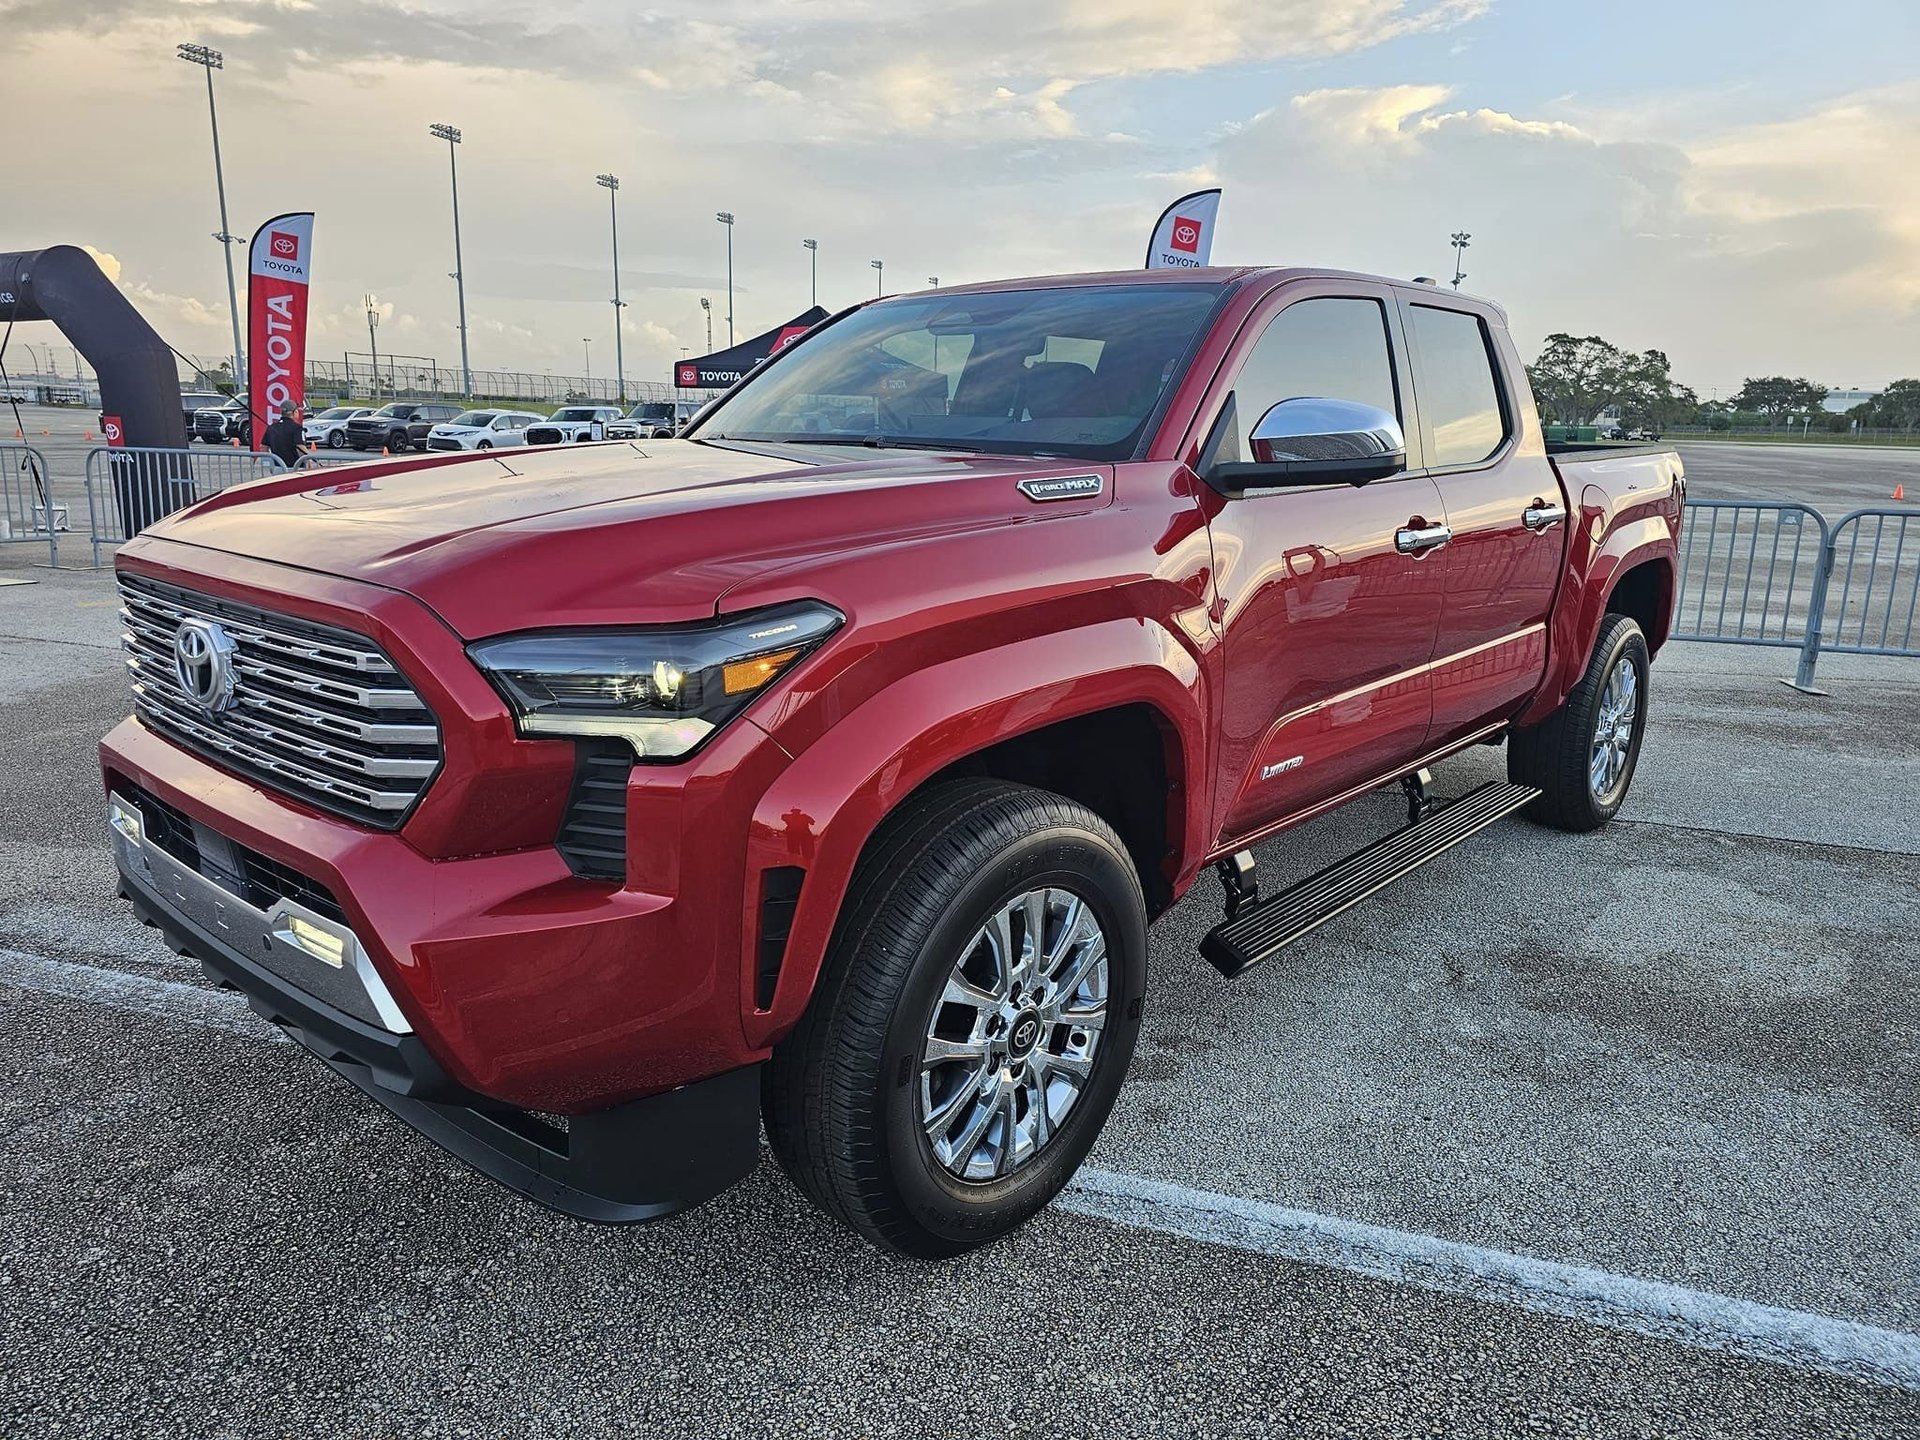 2024 Tacoma Official SUPERSONIC RED 2024 Tacoma Thread (4th Gen) 380732152_10161079208957463_2923576371985940780_n-jpg.1362